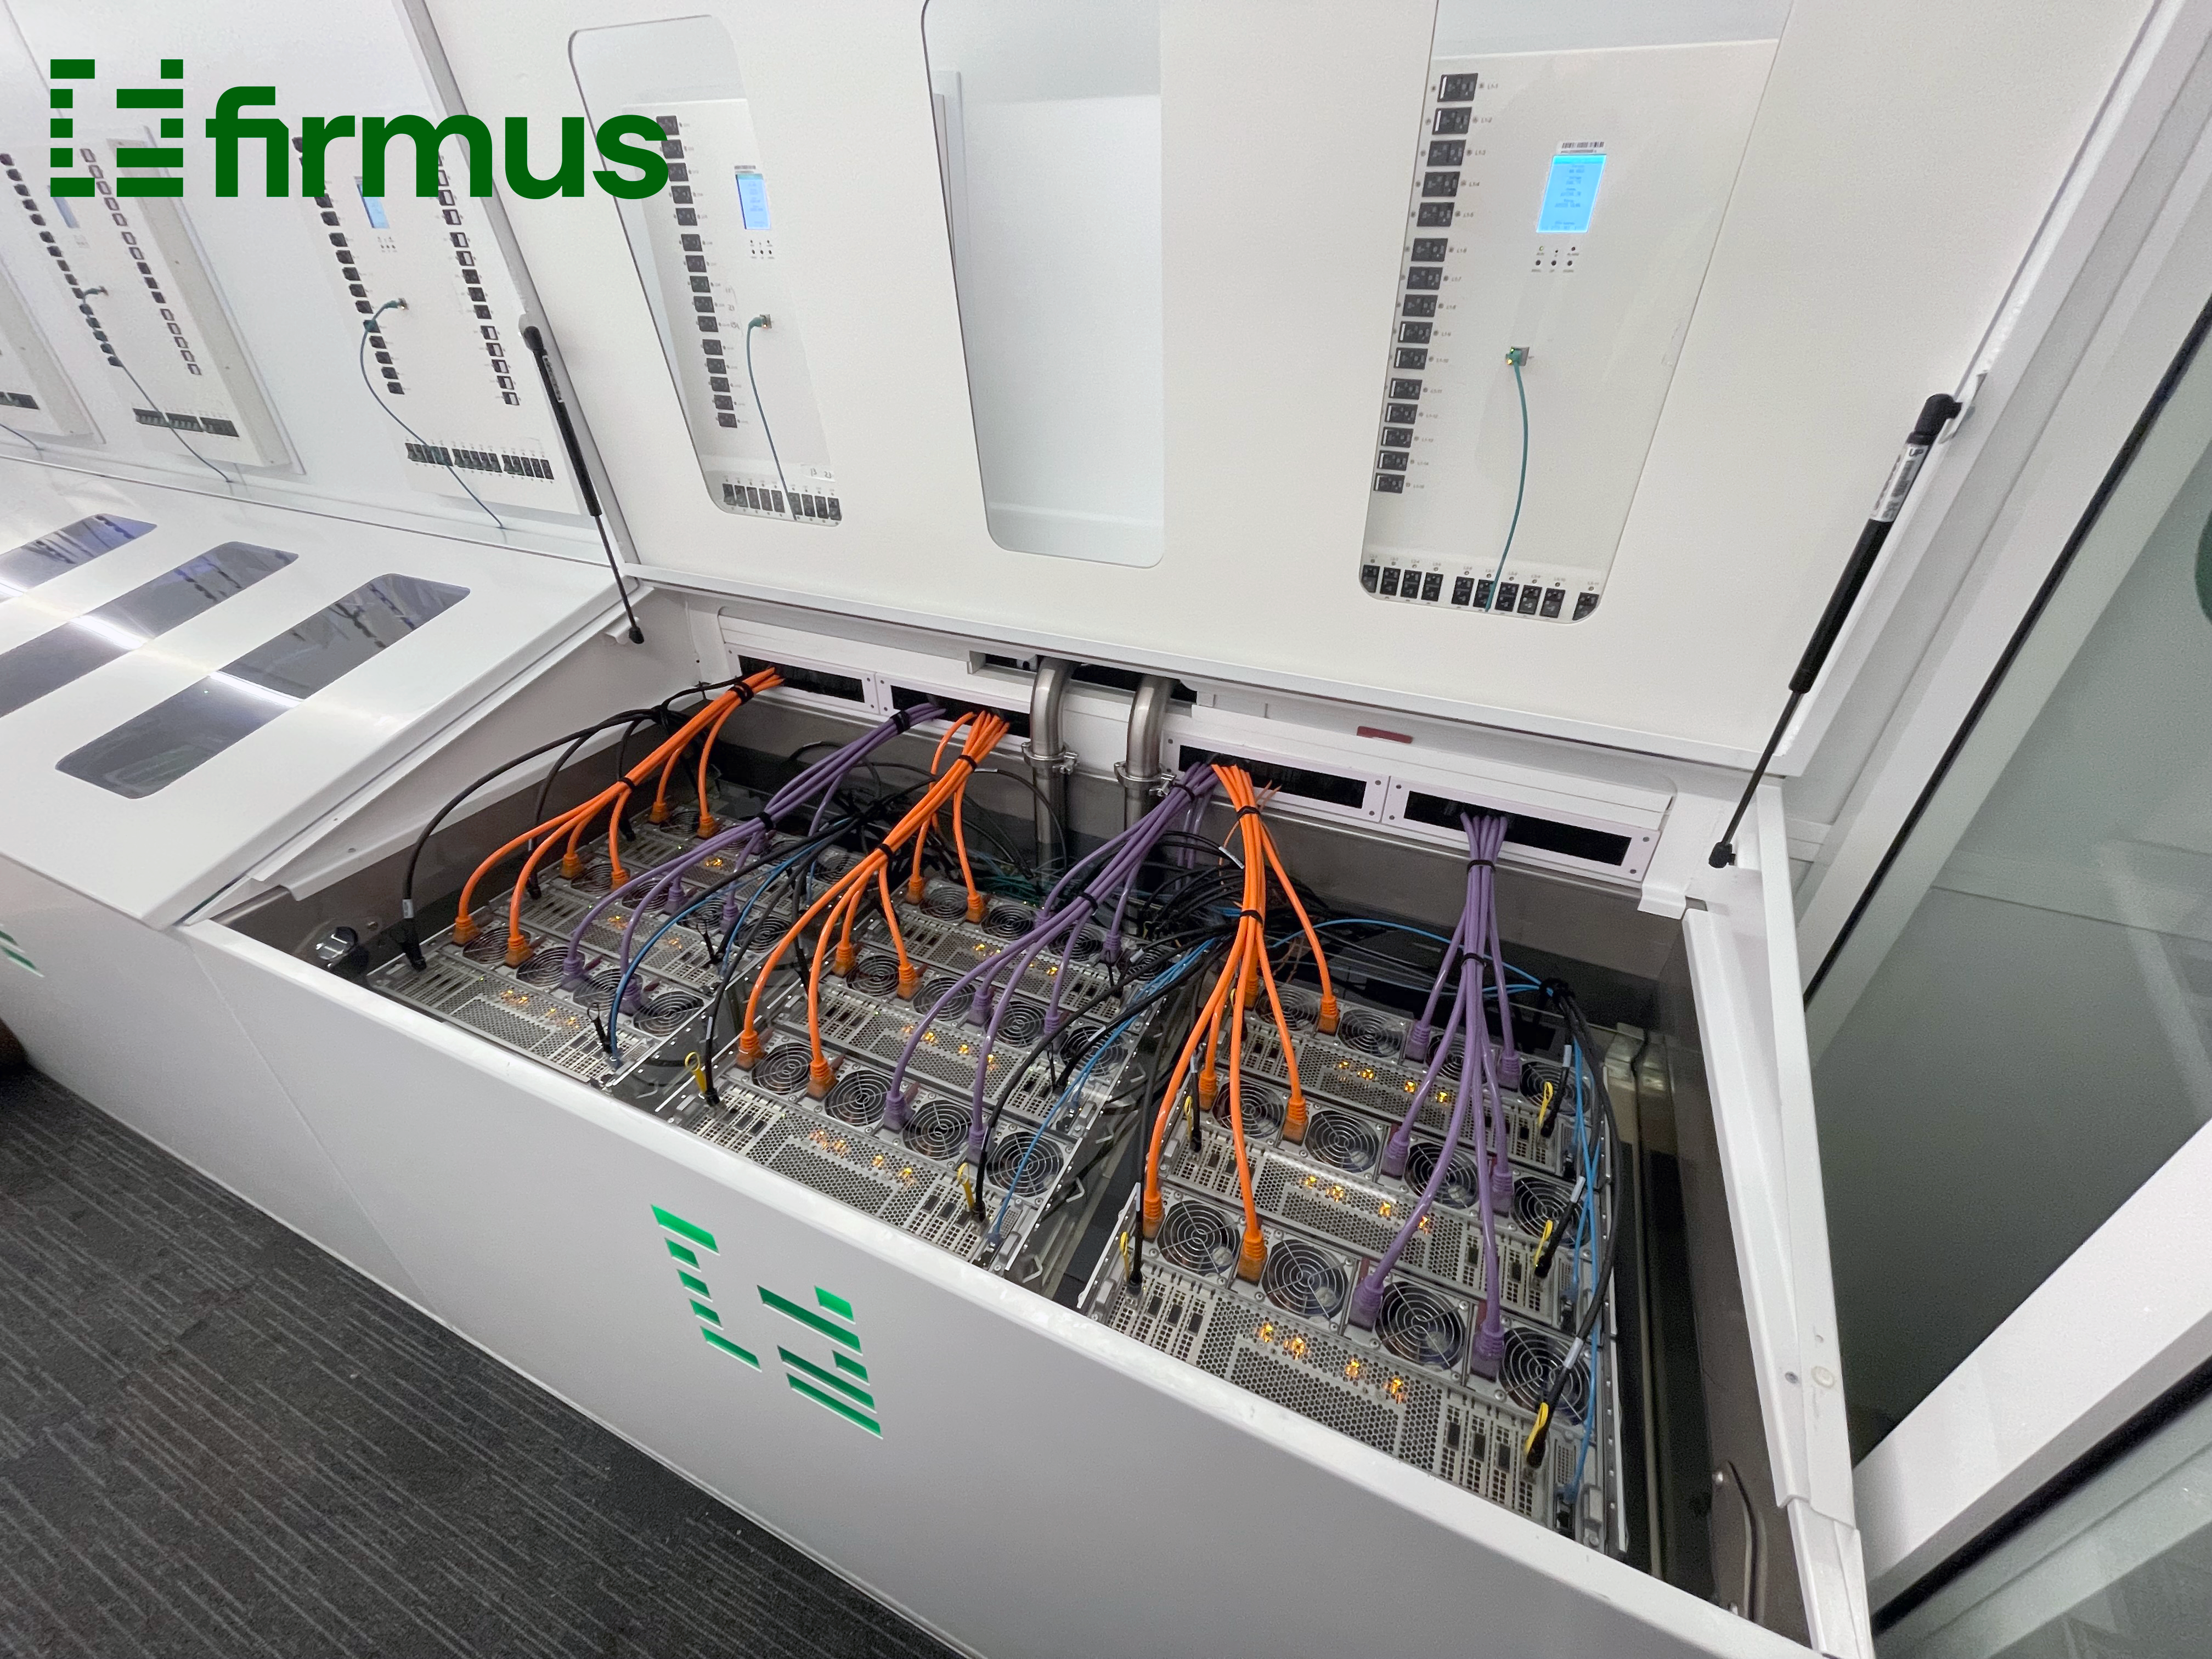 Within the HyperCube is a fleet of high-performance servers in an immersion-cooled environment. The combination of Firmus’ immersion-cooled computing platform paired with STT GDC’s highly efficient data centre infrastructure will result in AI workloads running with a lower PUE, lower CO2 emissions and higher petaflops per watt.